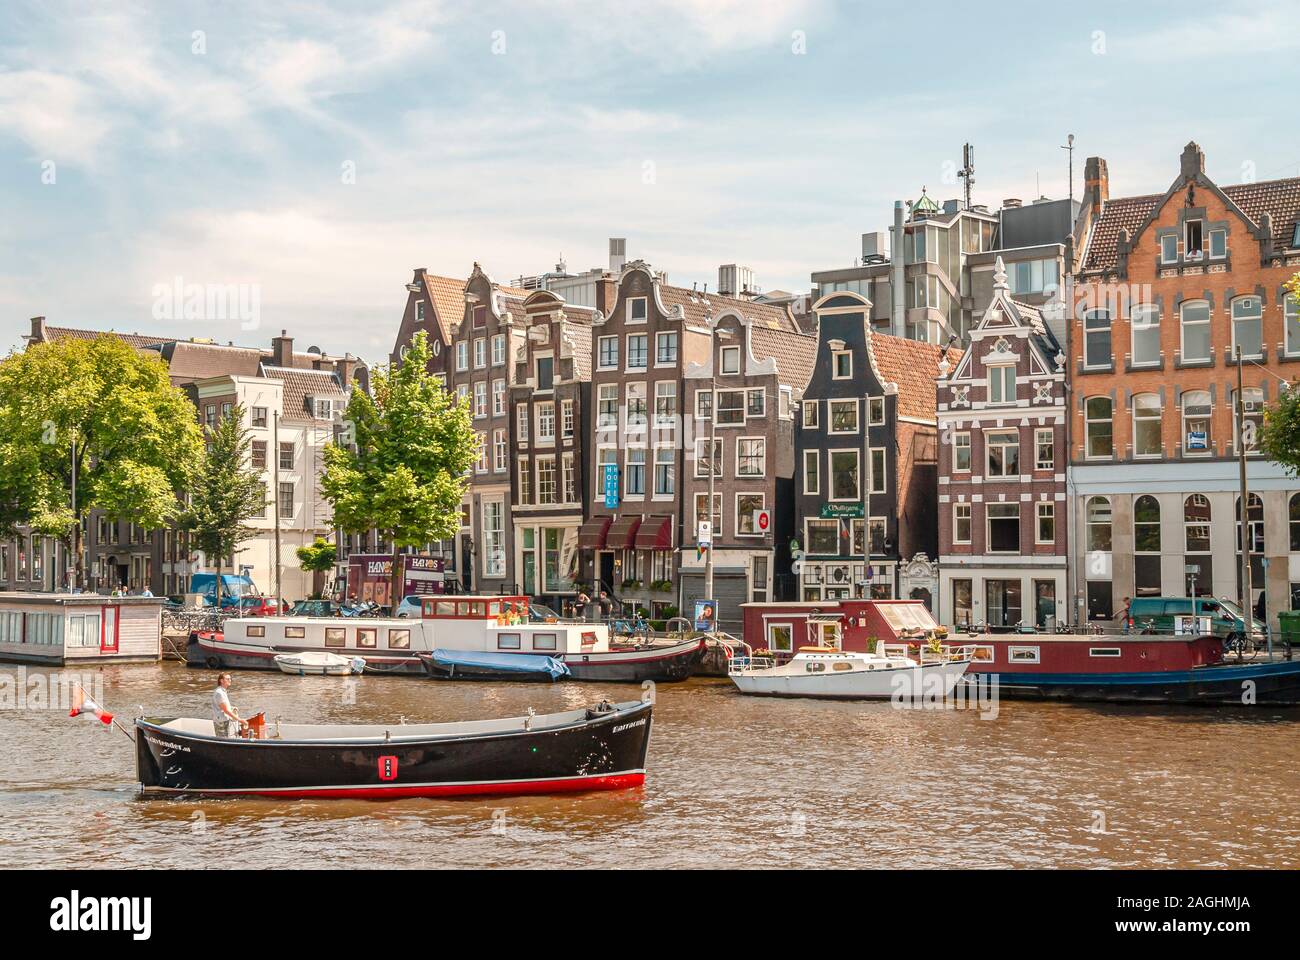 Historical architecture and houseboats at channel in the city center of Amsterdam, Netherlands Stock Photo